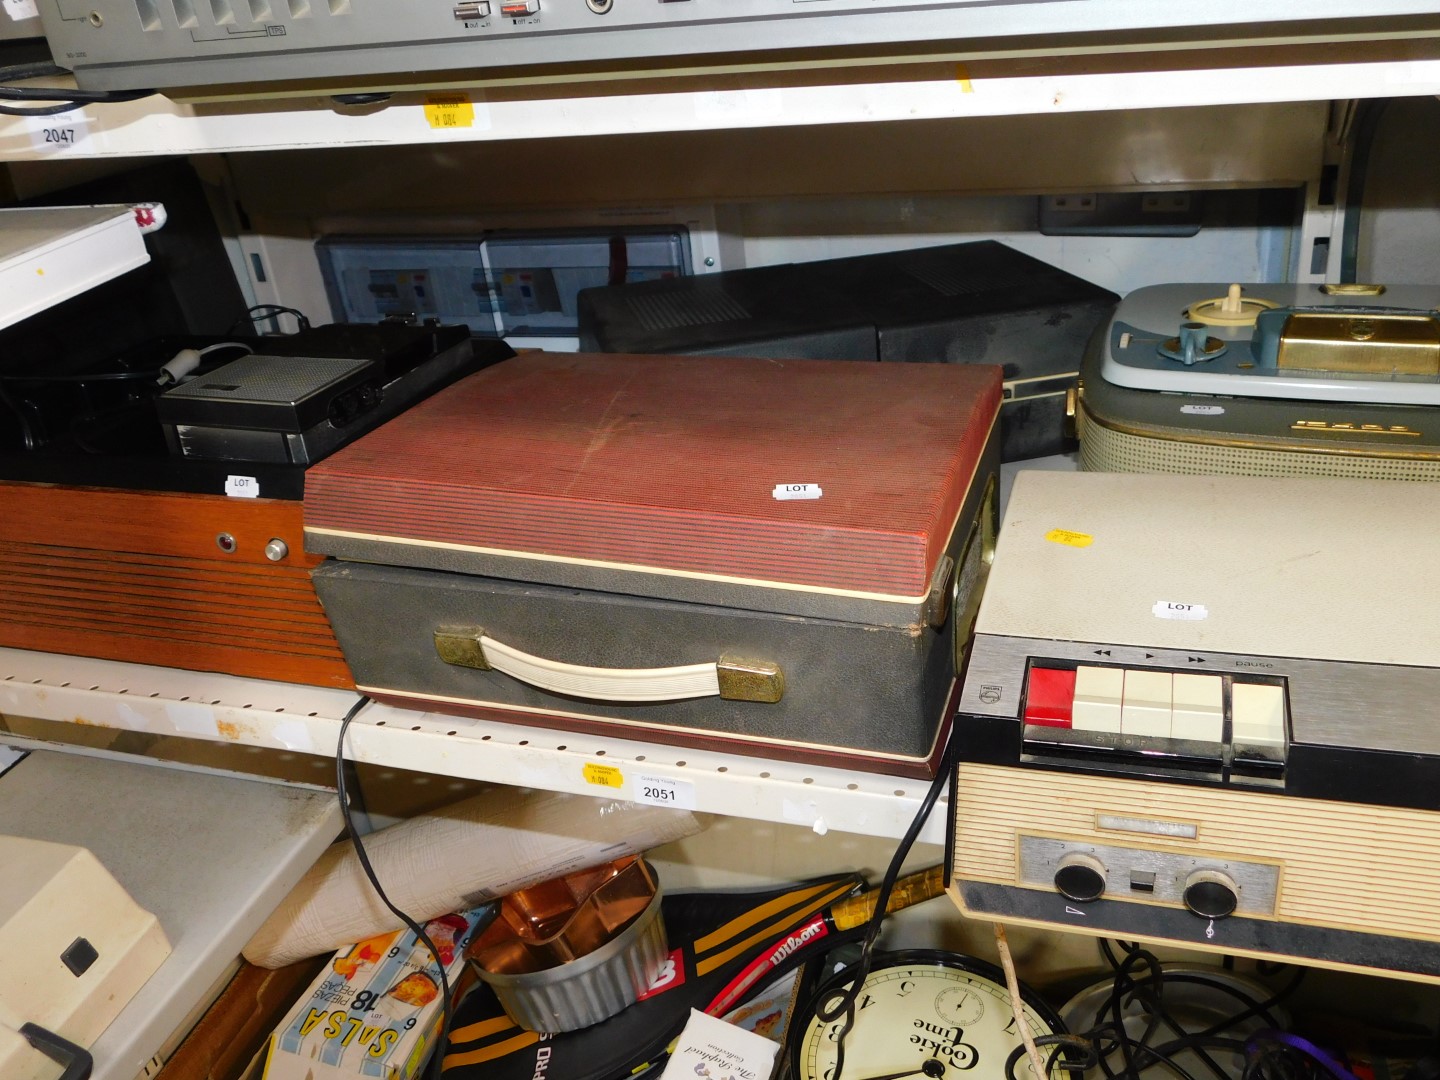 Four reel-to-reel tape recorders, including Phillips, Civic and Grundig, and a Phillips cassette